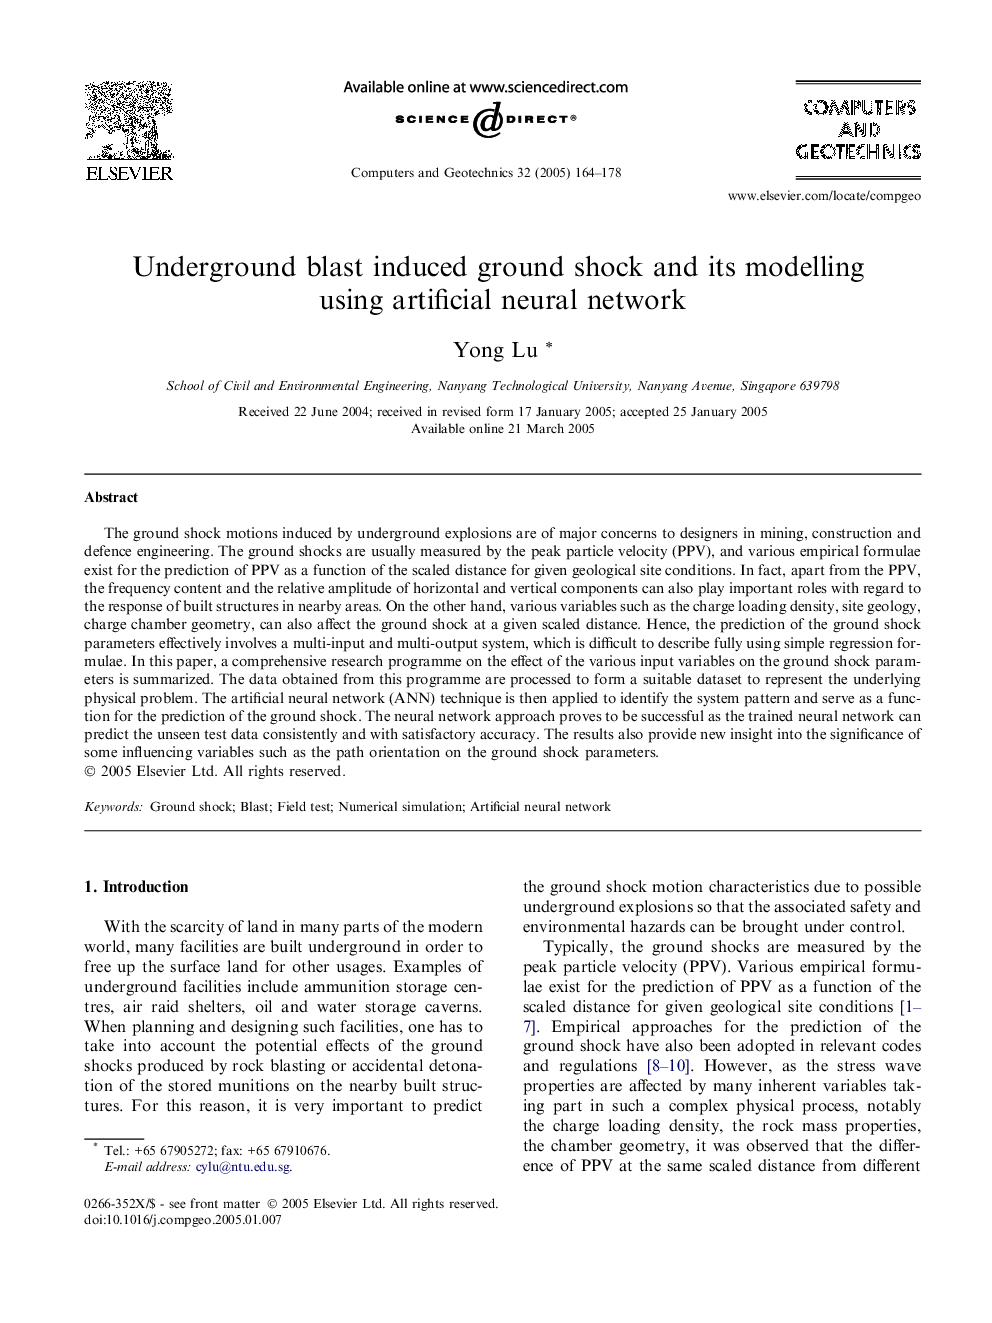 Underground blast induced ground shock and its modelling using artificial neural network